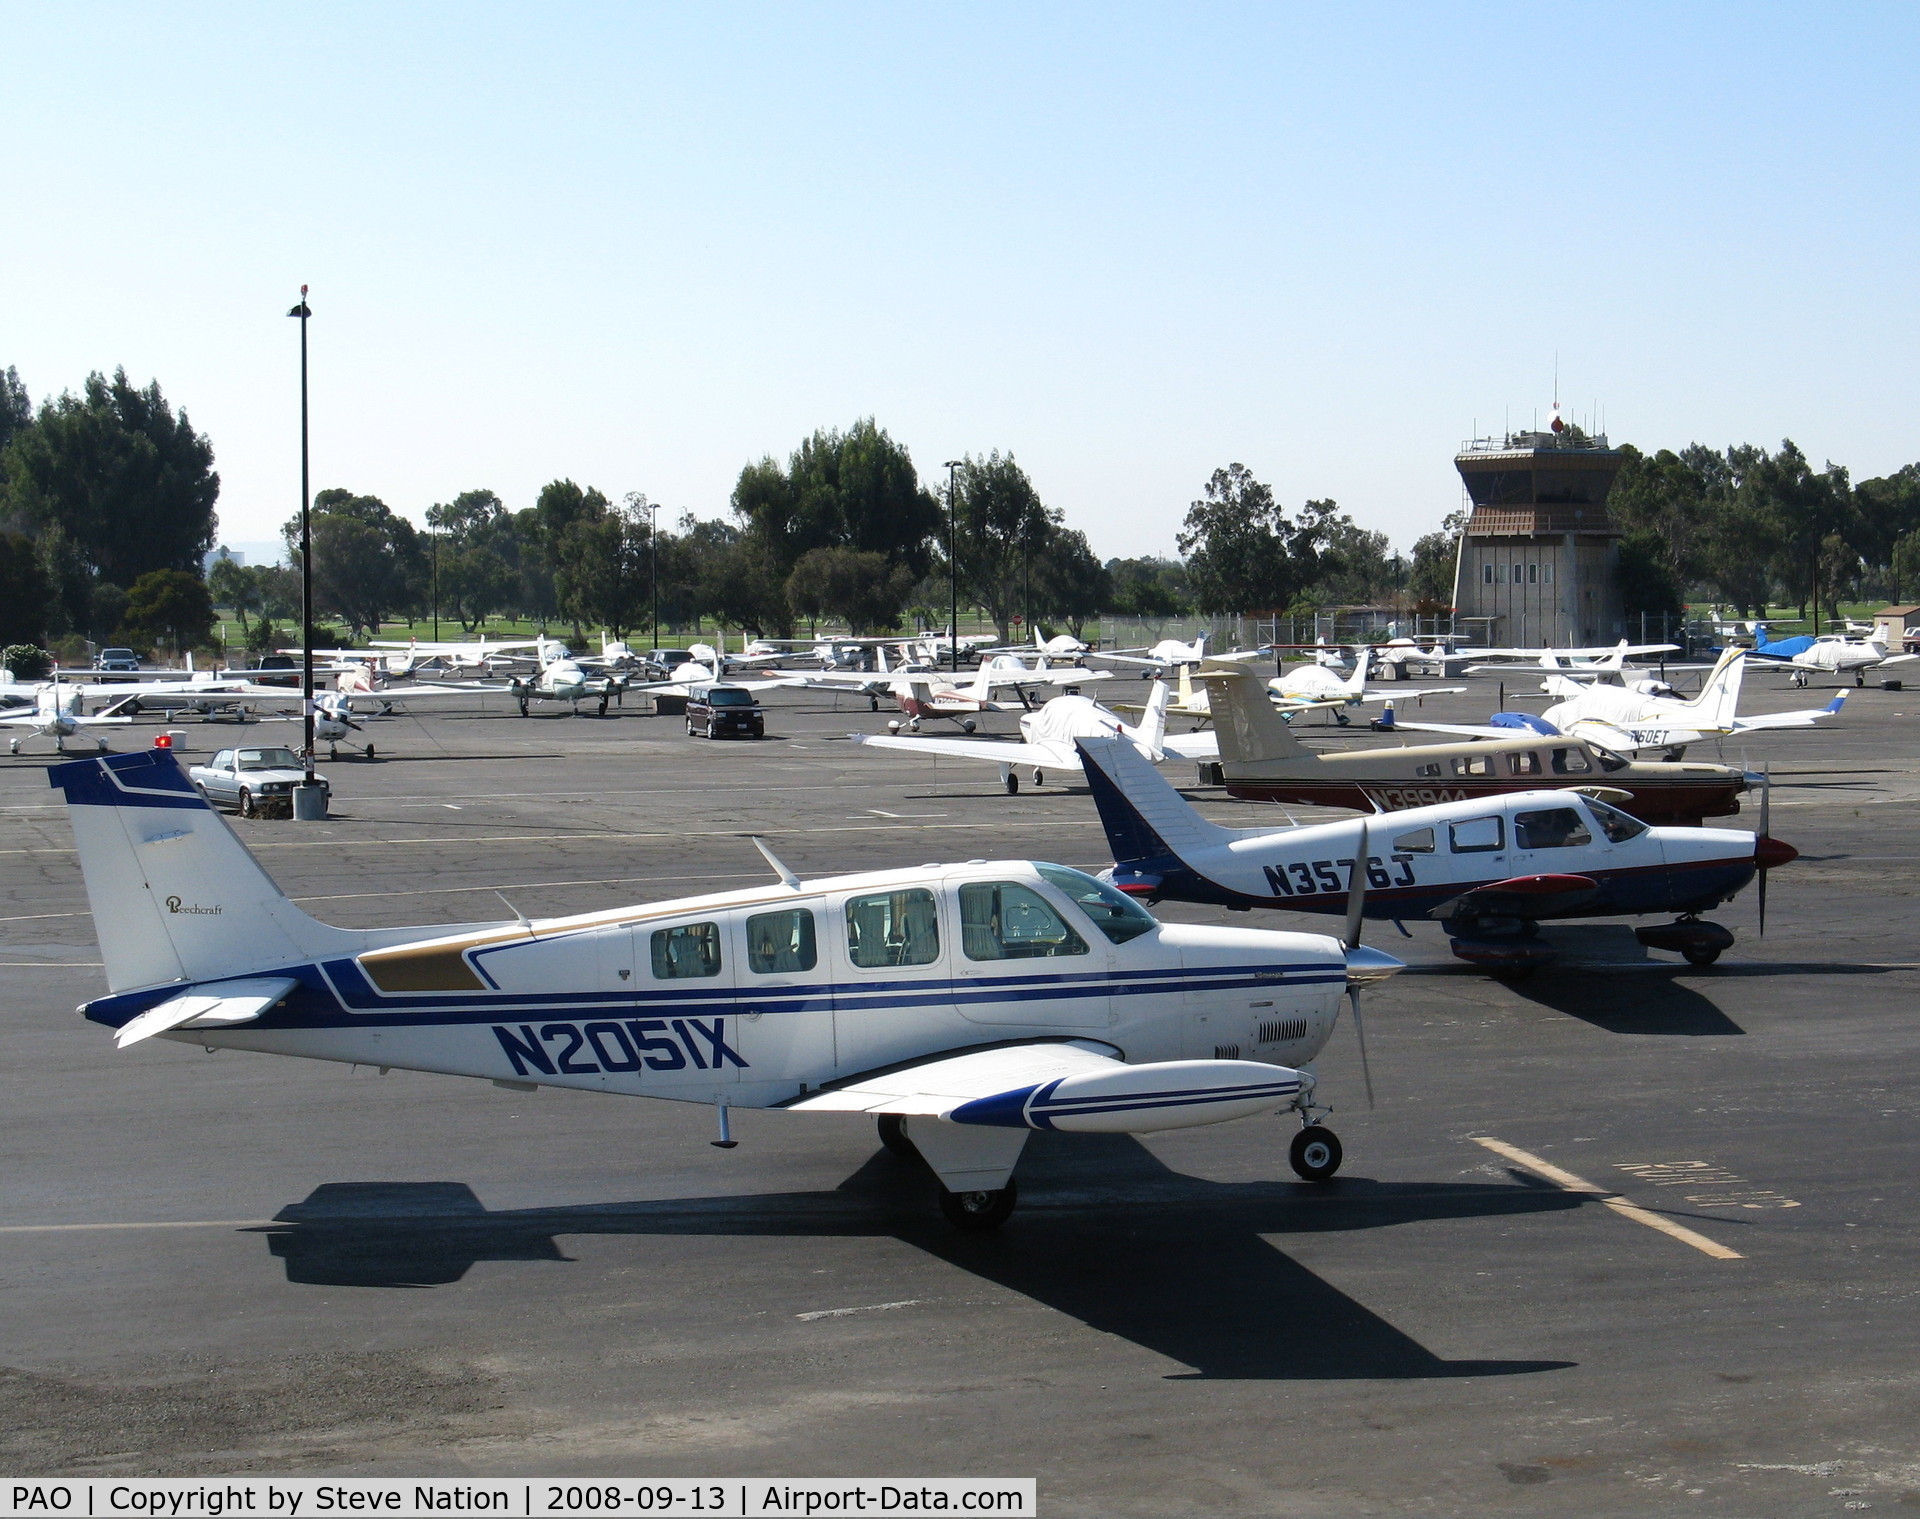 Palo Alto Arpt Of Santa Clara Co Airport (PAO) - N2051X/N3946J/N39944 running-up engines while tower lets stream of Cessnas come home